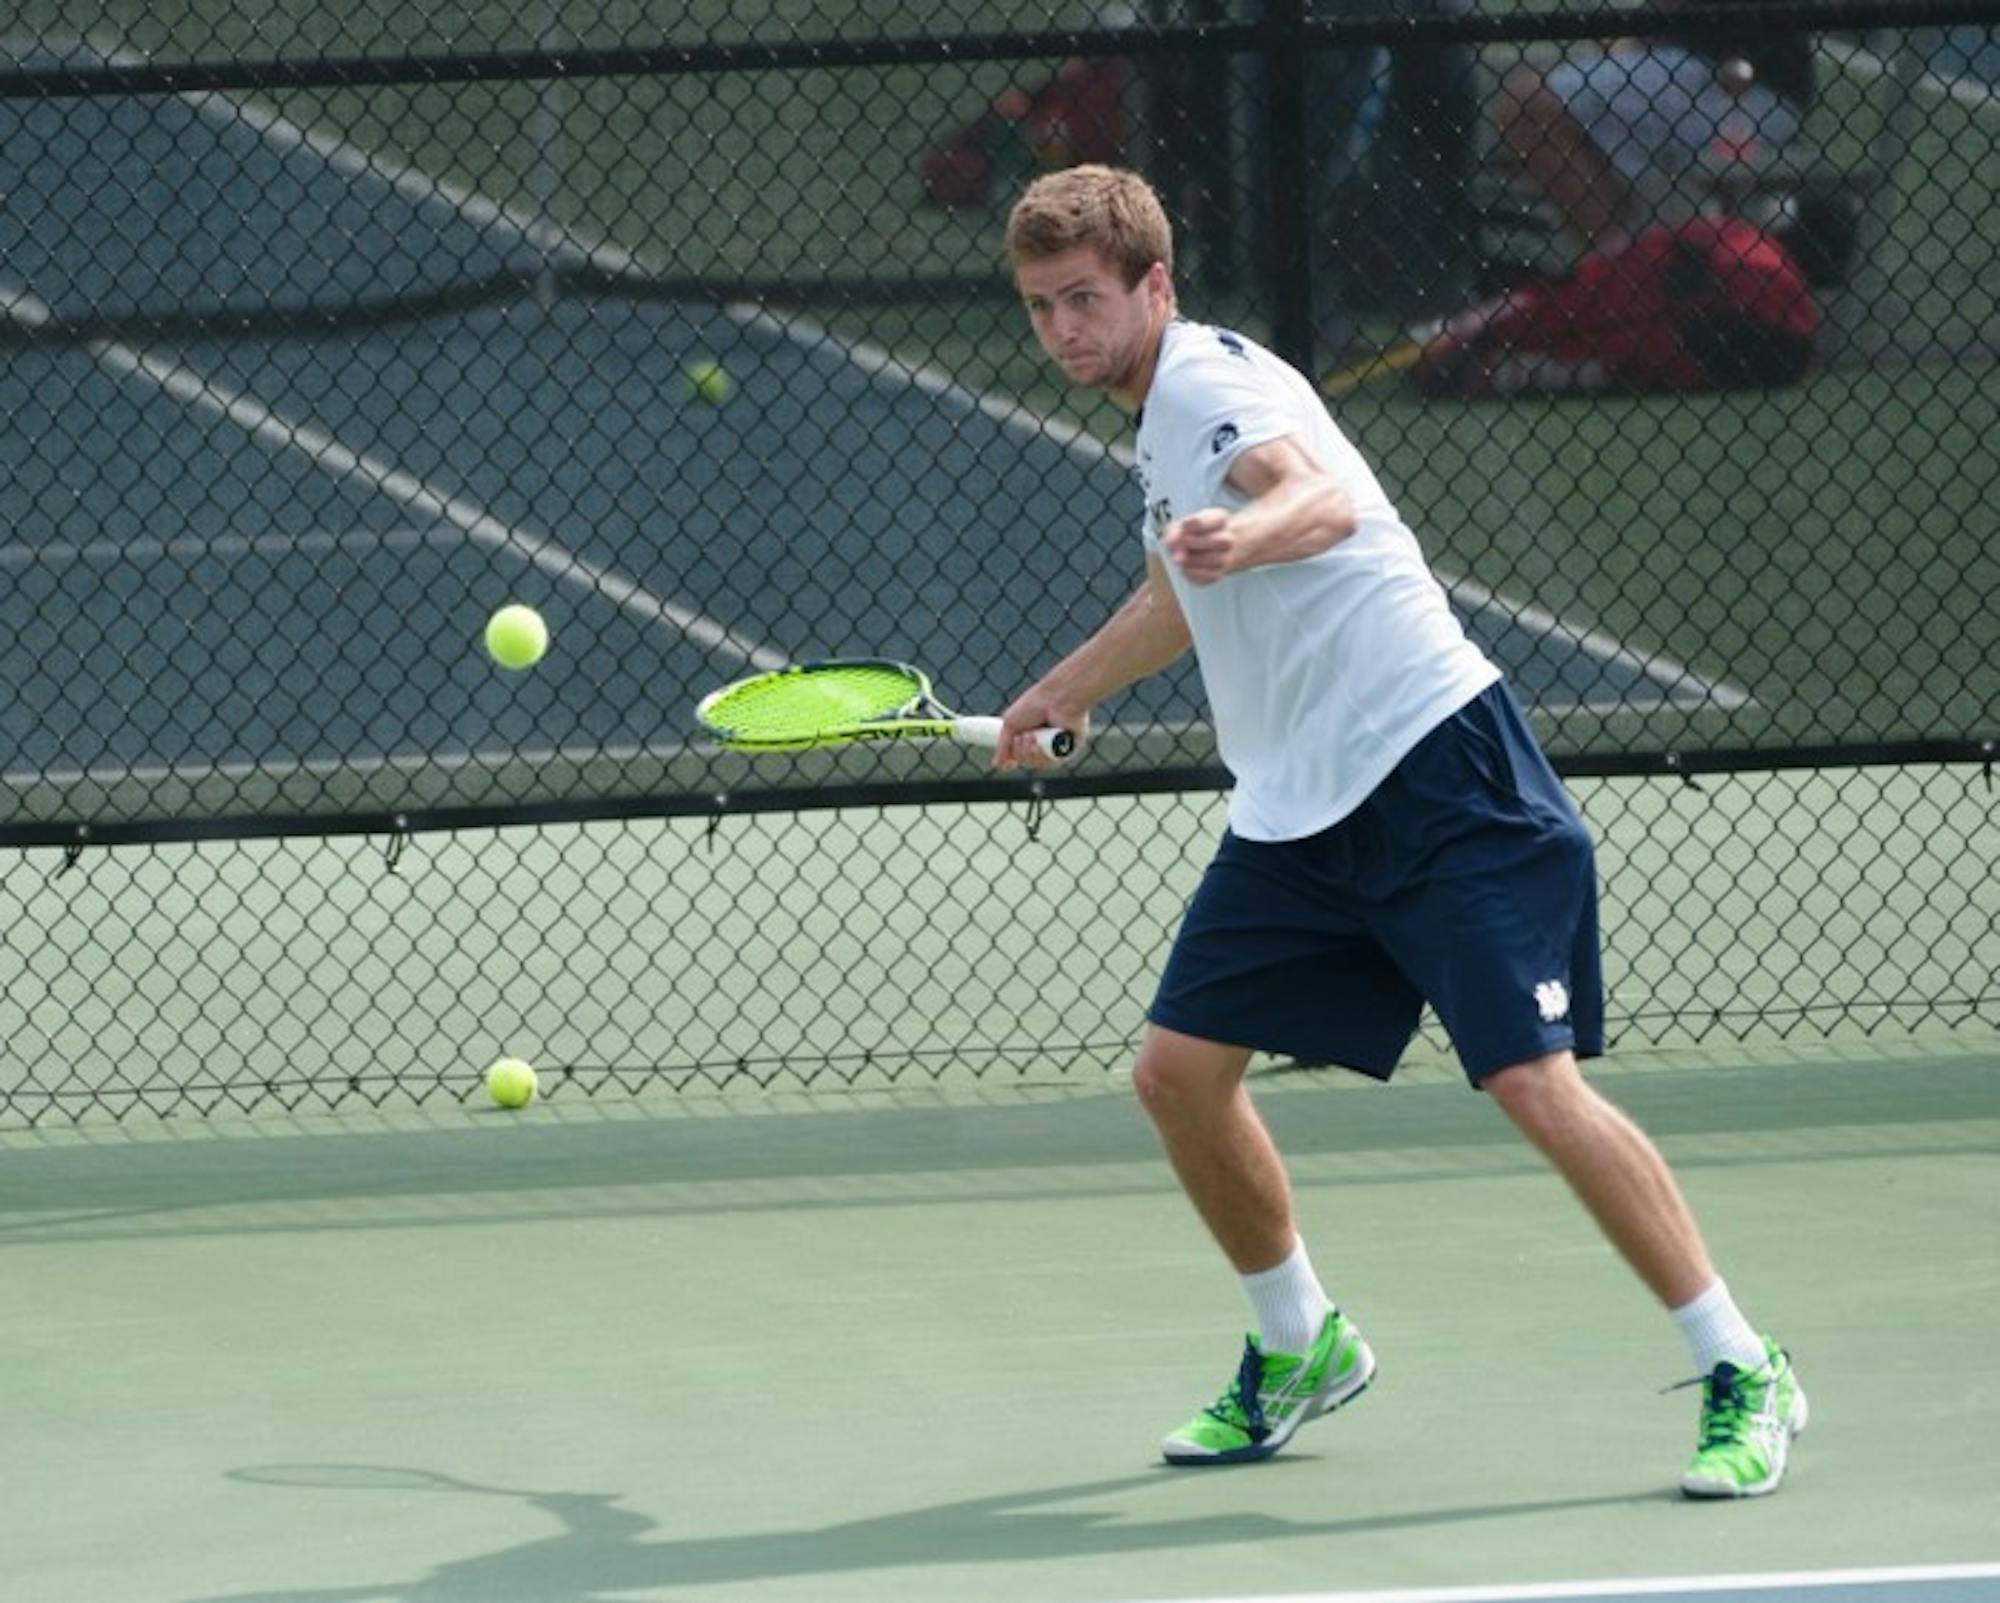 Senior Quentin Monaghan forehands the ball during Notre Dame’s 4-3 victory over North Carolina State on April 18. He will compete this weekend in both singles and doubles at the National Indoor Championships.